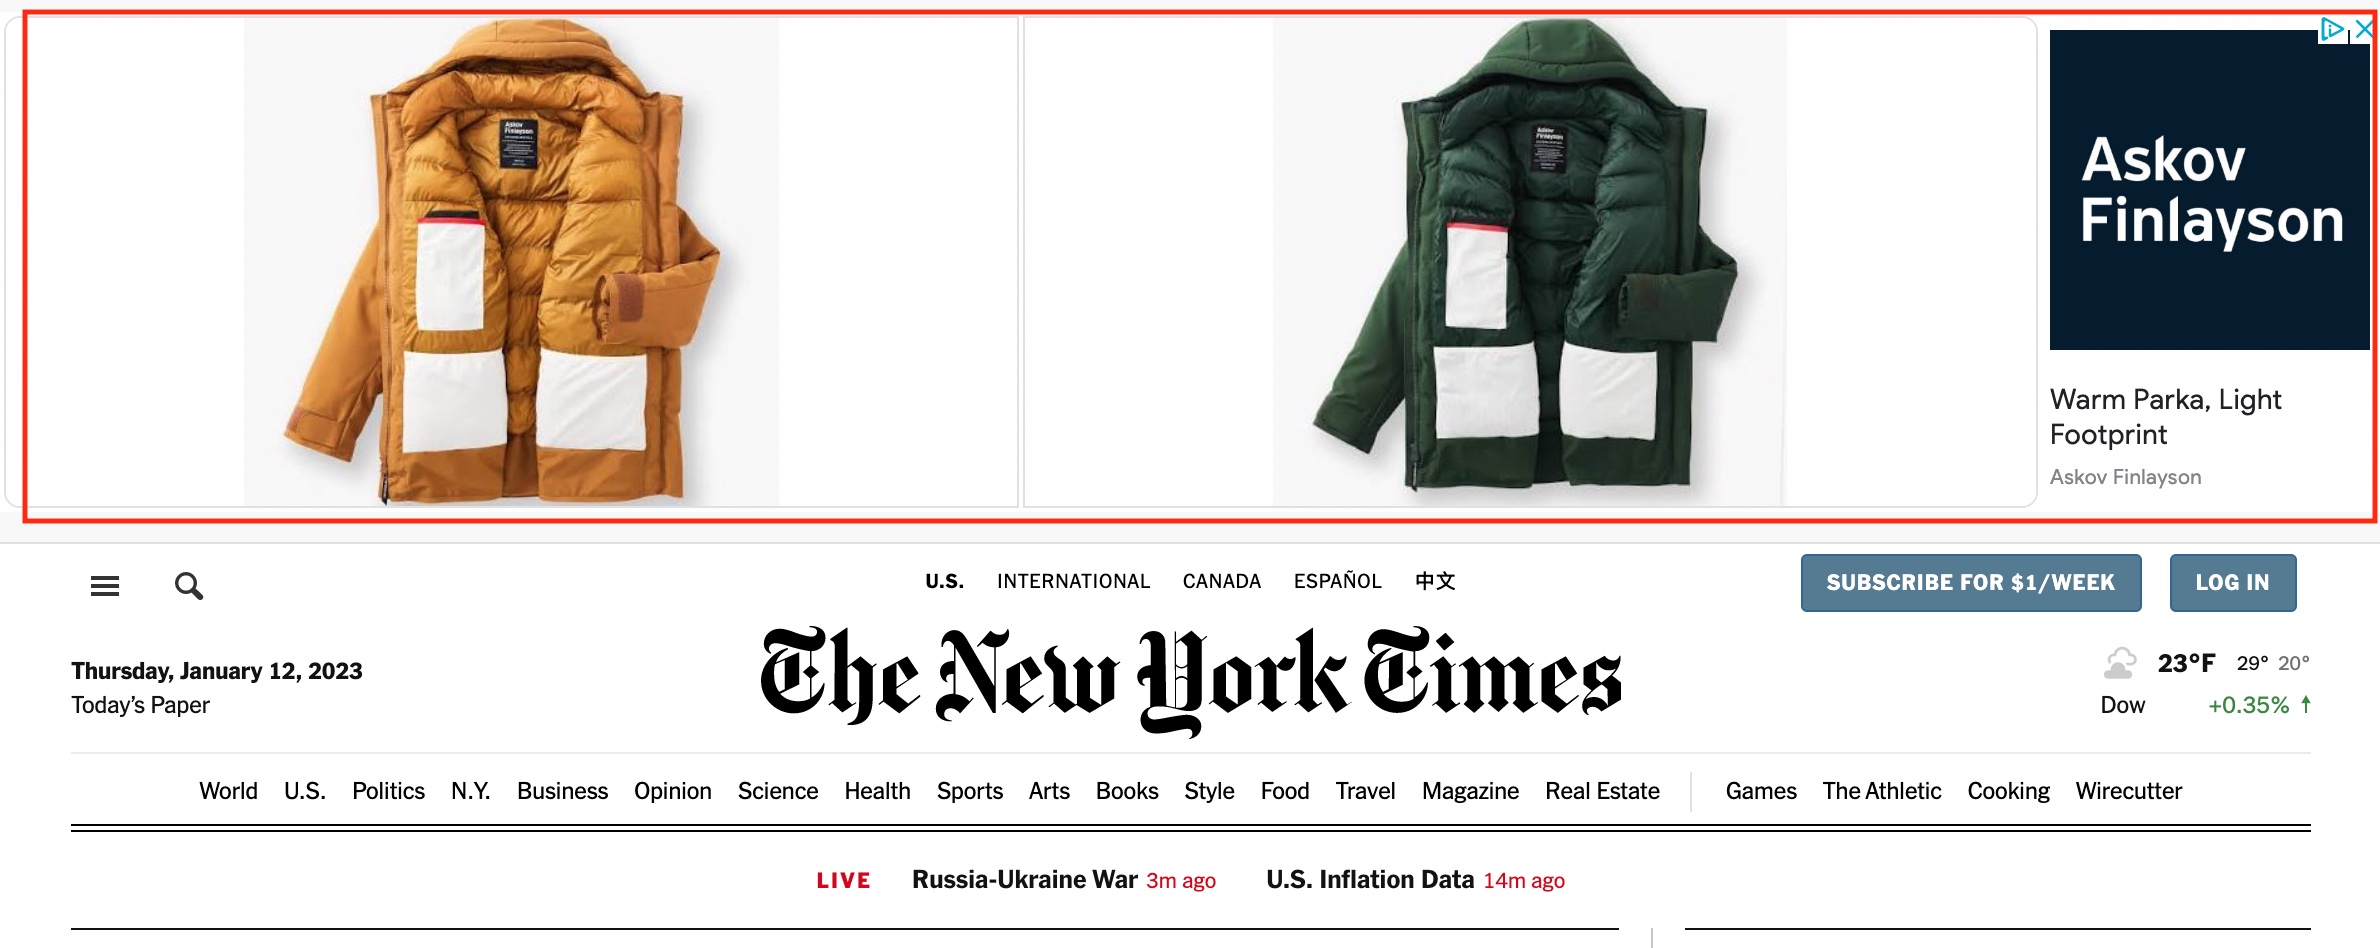 Screenshot of display ad on The New York Times banner for Askov Finlayson Parkas